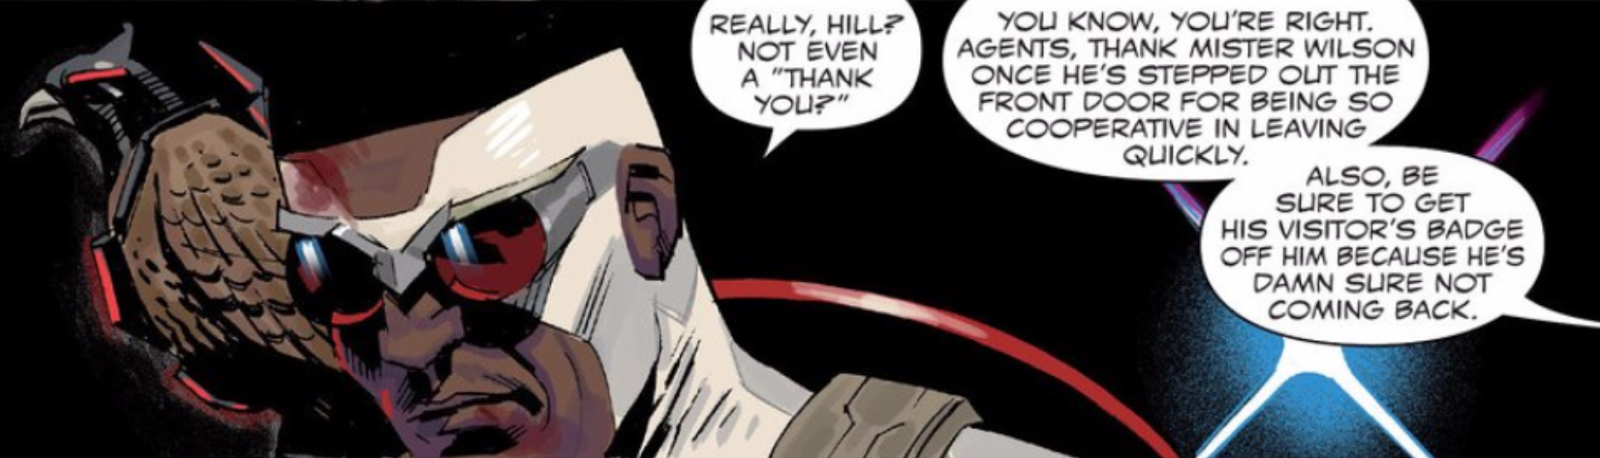 The New Captain America Comic Is All About America’s Real World Problems, And People Are Pissed